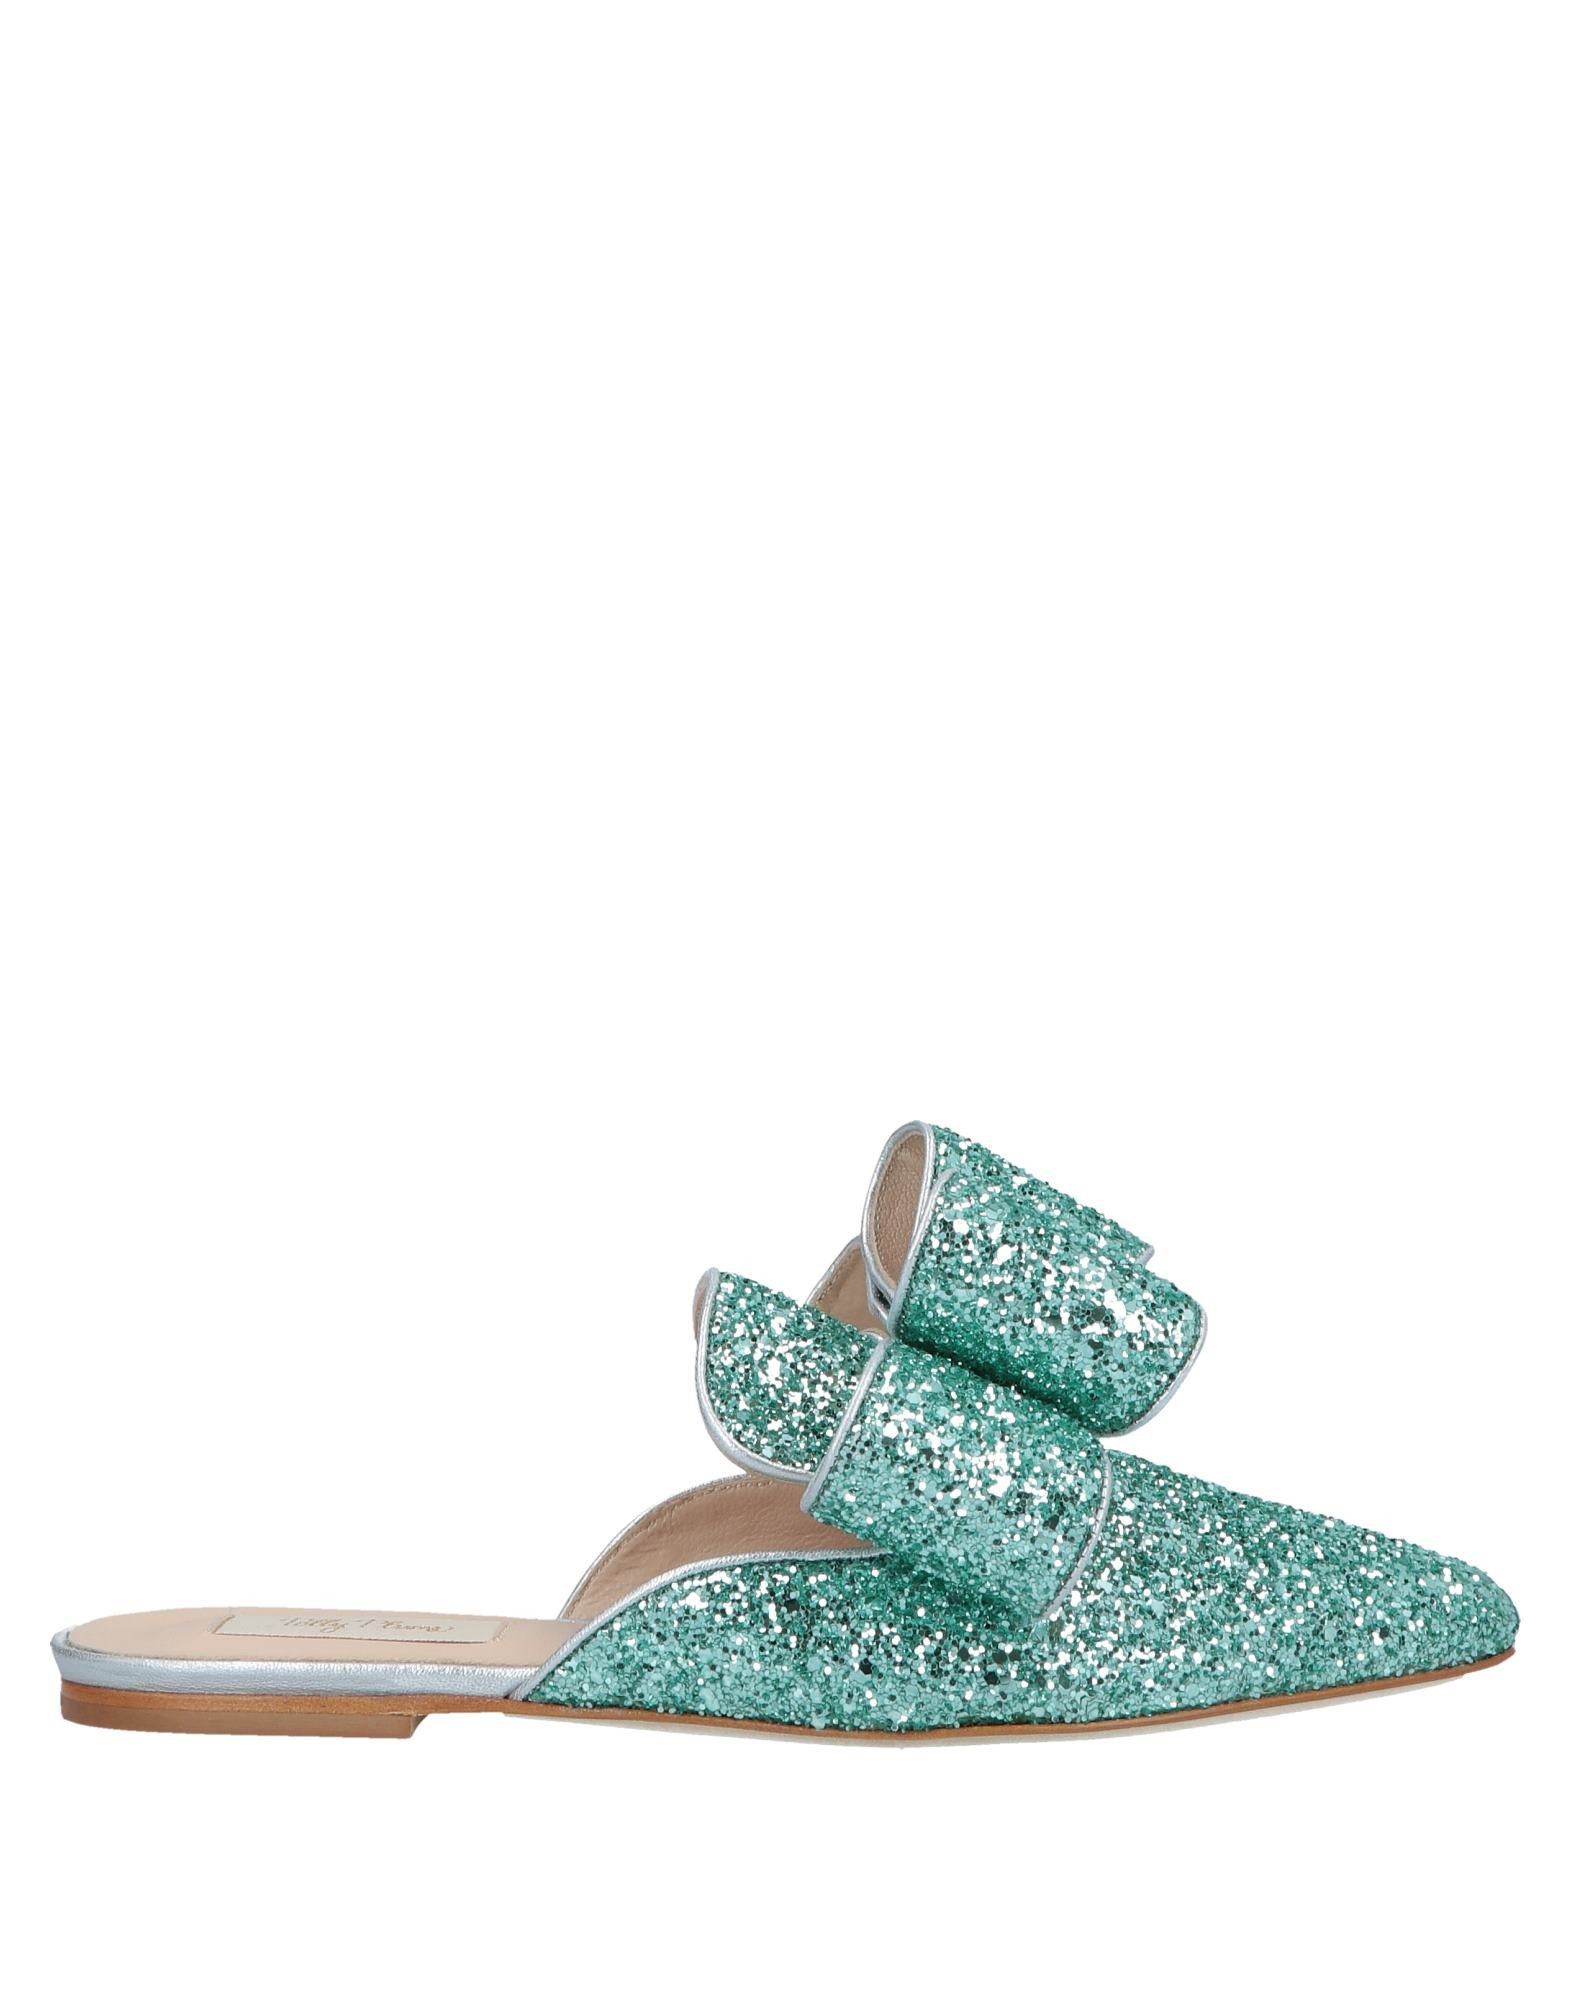 Polly Plume Mules